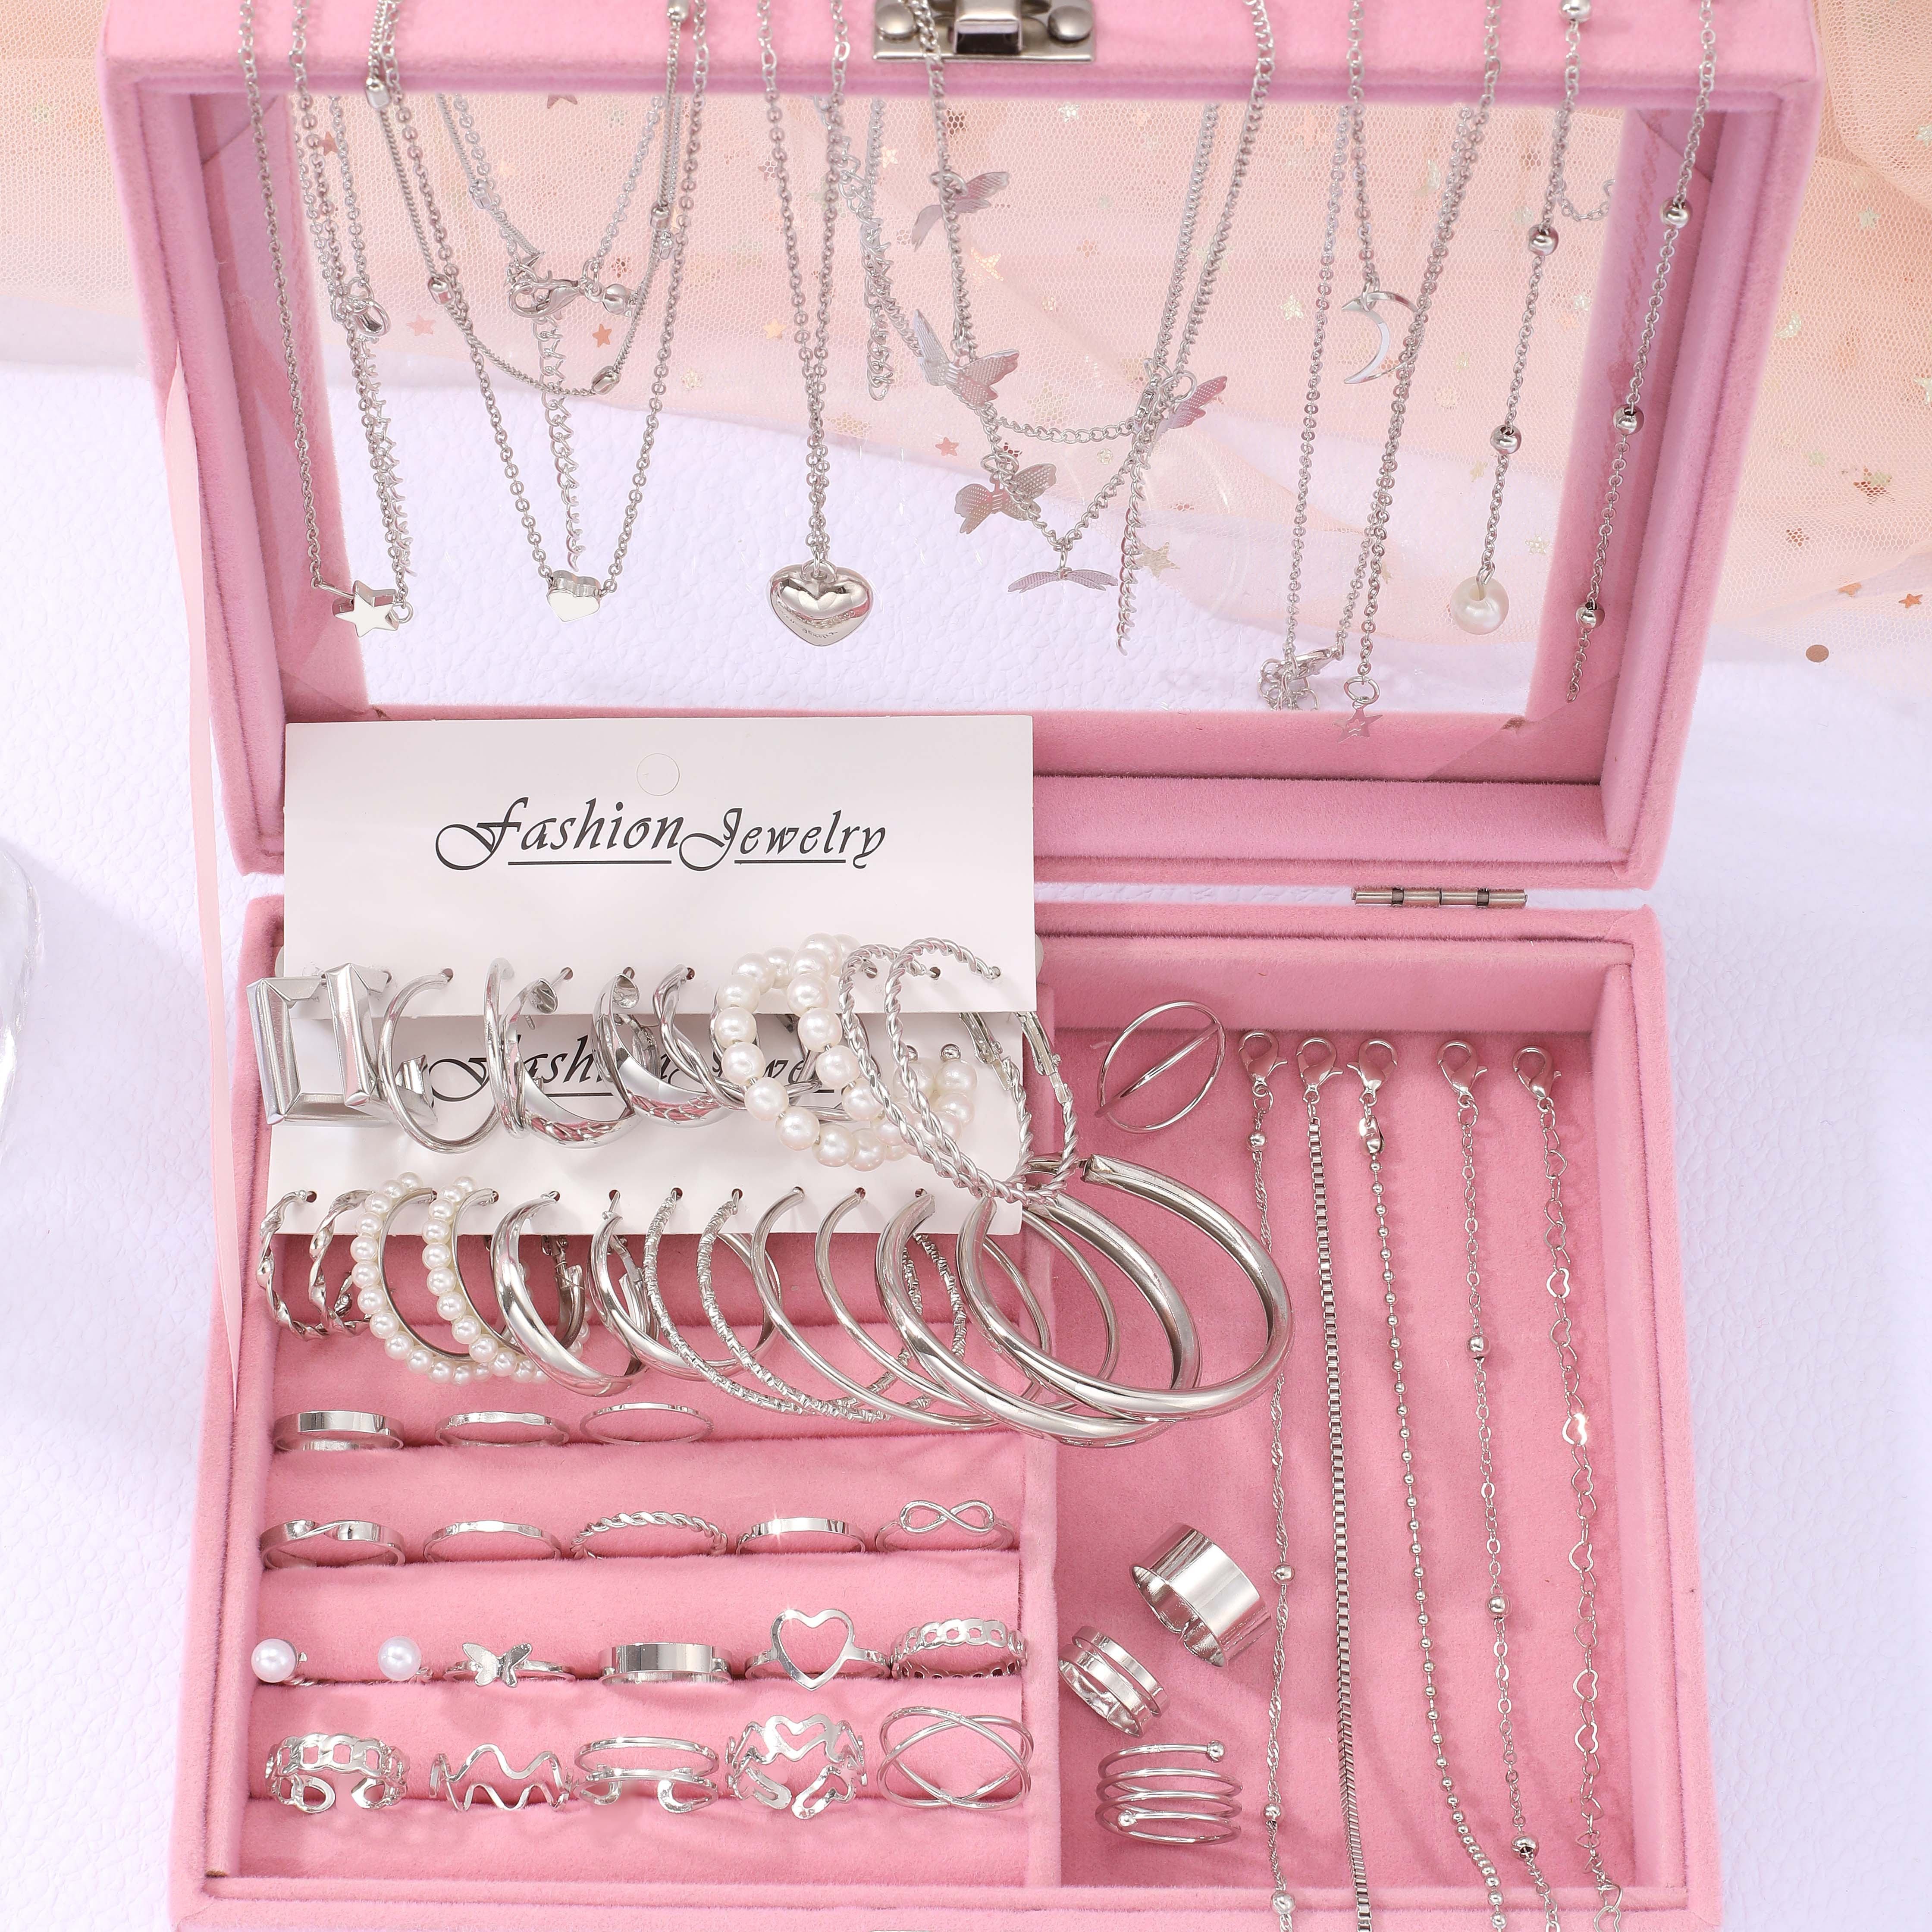 

Elegant Silvery 45-piece Fashion Jewelry Set With Faux Pearls - Heart Pendants, Necklaces, Rings, Bracelets - Versatile Accessory Combo For Daily & Outings (box Not Included), Vintage Style